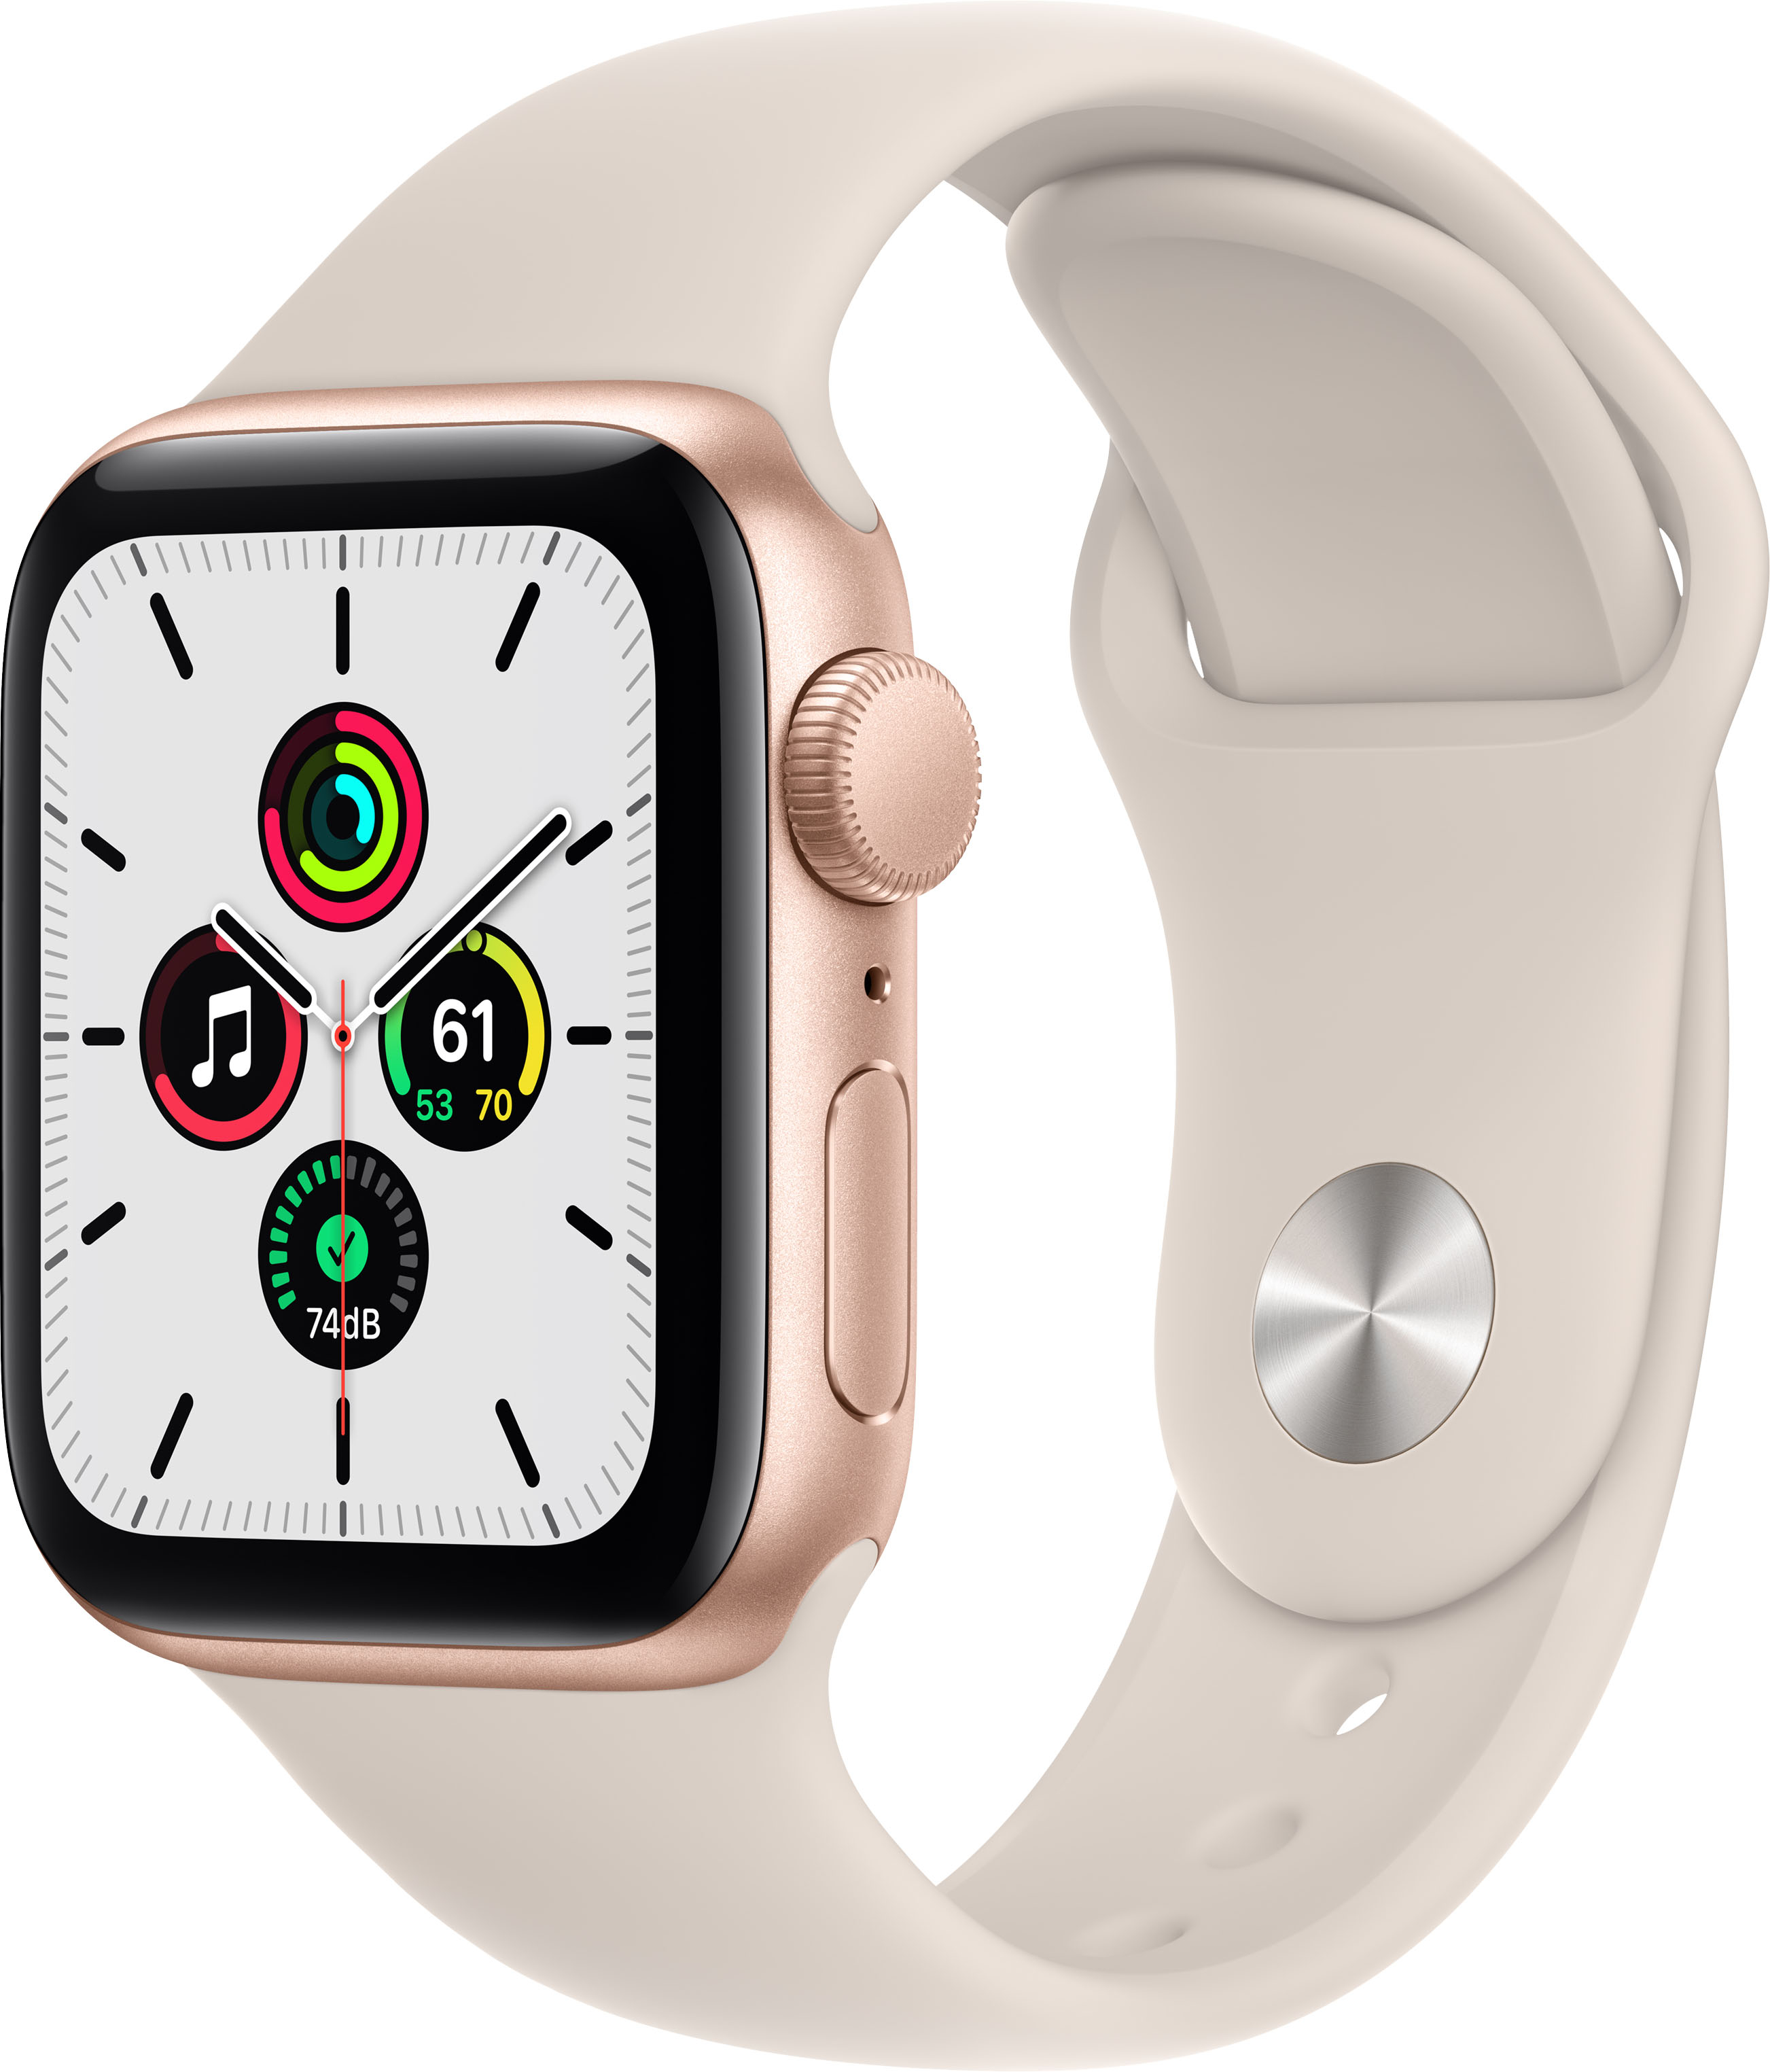 Apple Watch SE (GPS) 40mm WAS $279.00 NOW $249.00 SAVE $30